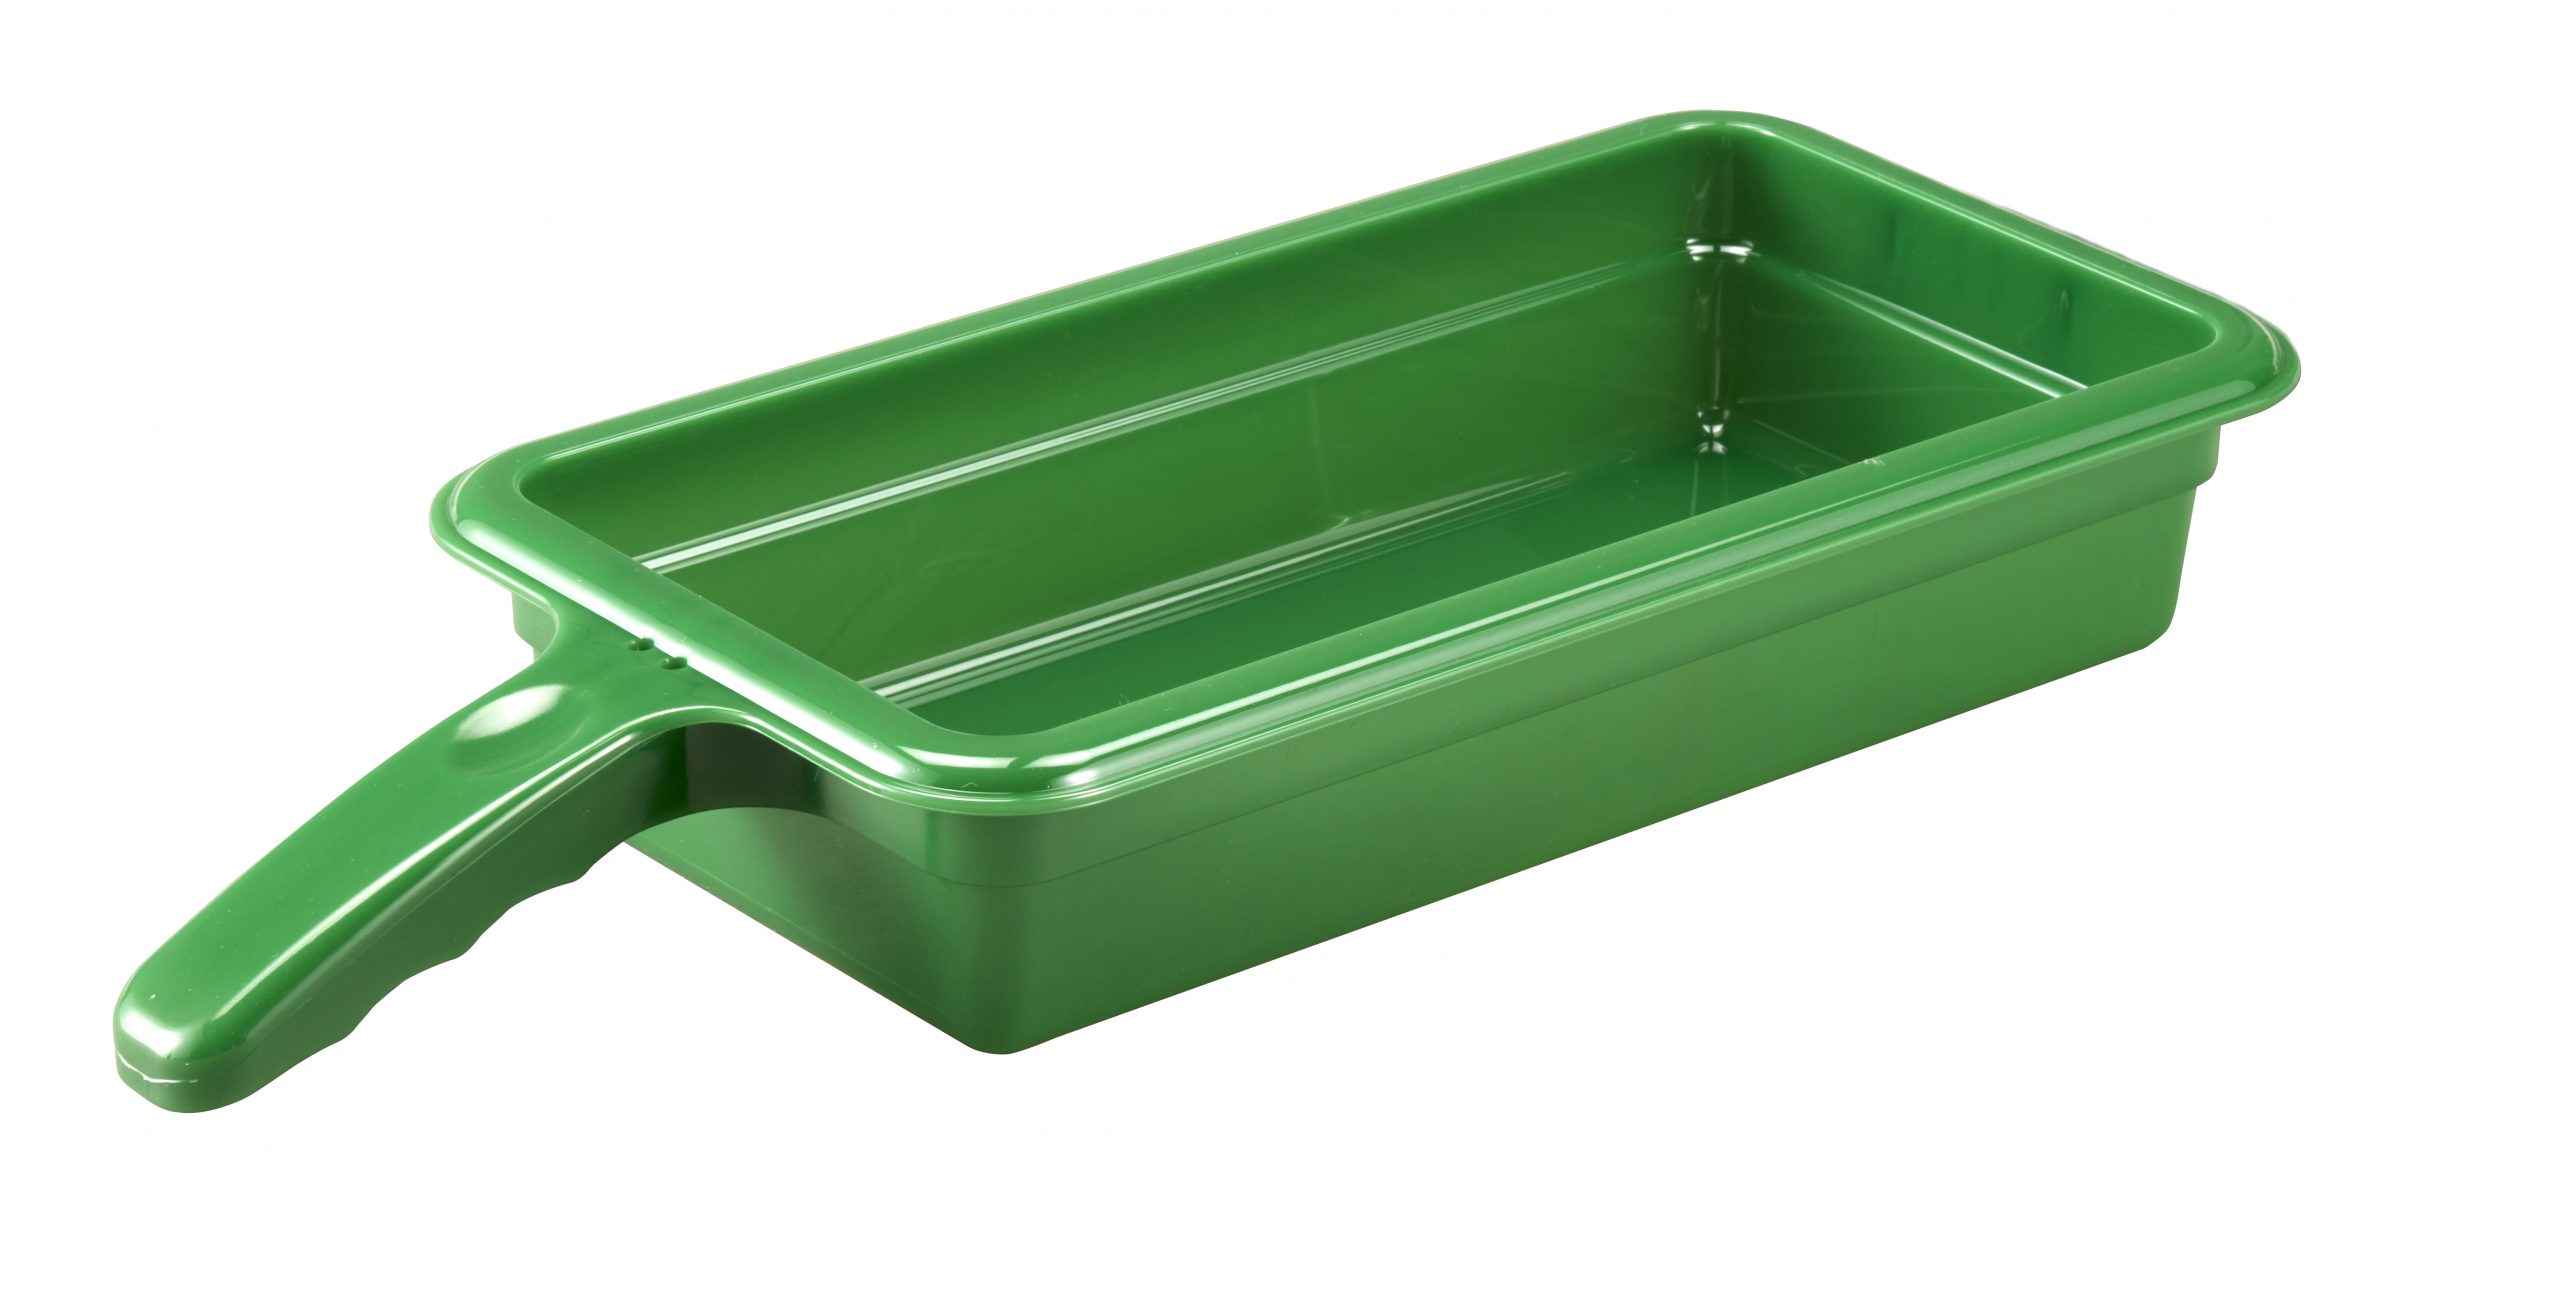 Go for green with Cambro’s new hot holding handled pans